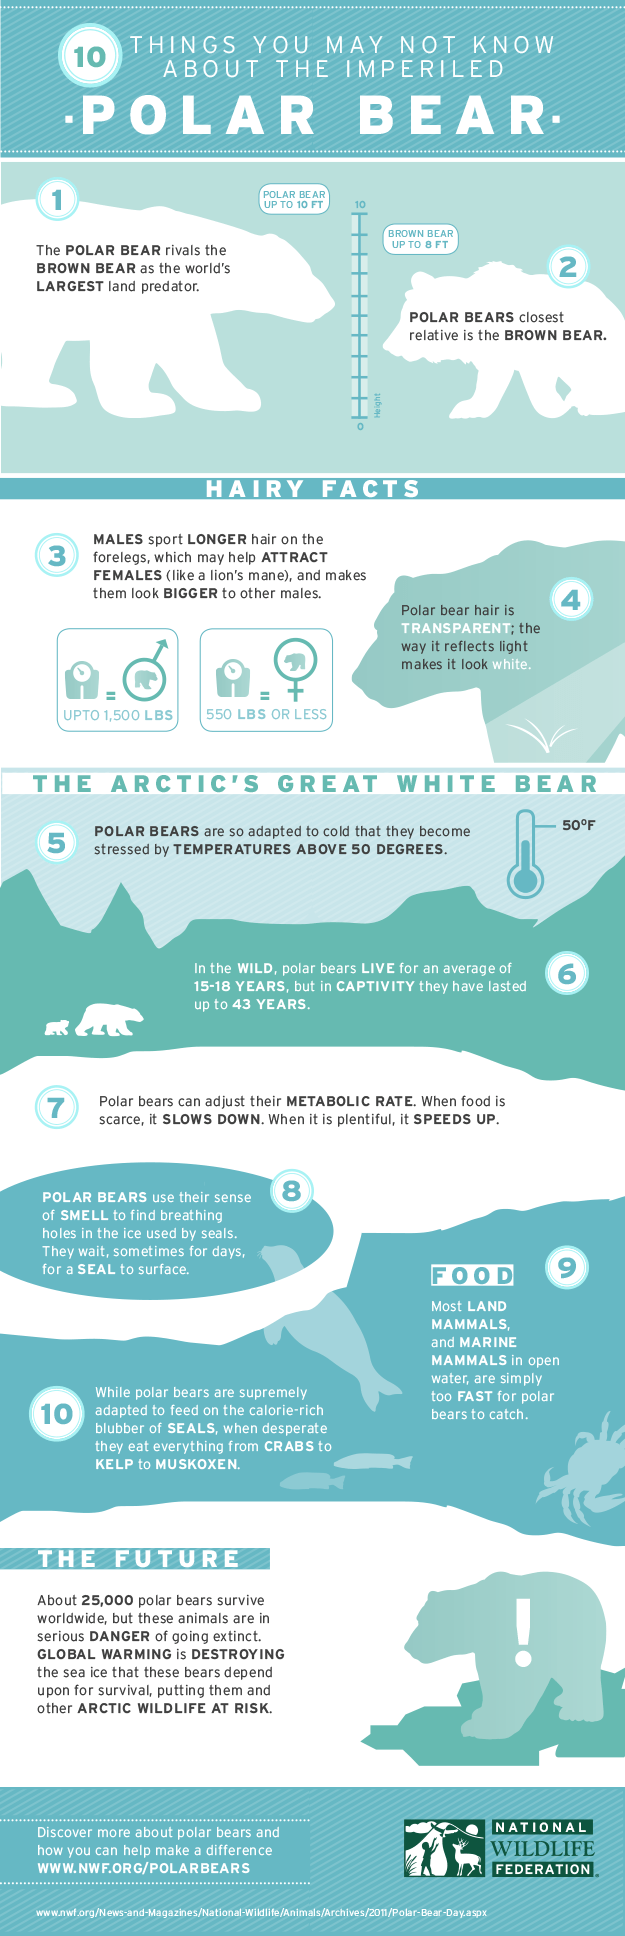 10 Facts about the Polar Bear